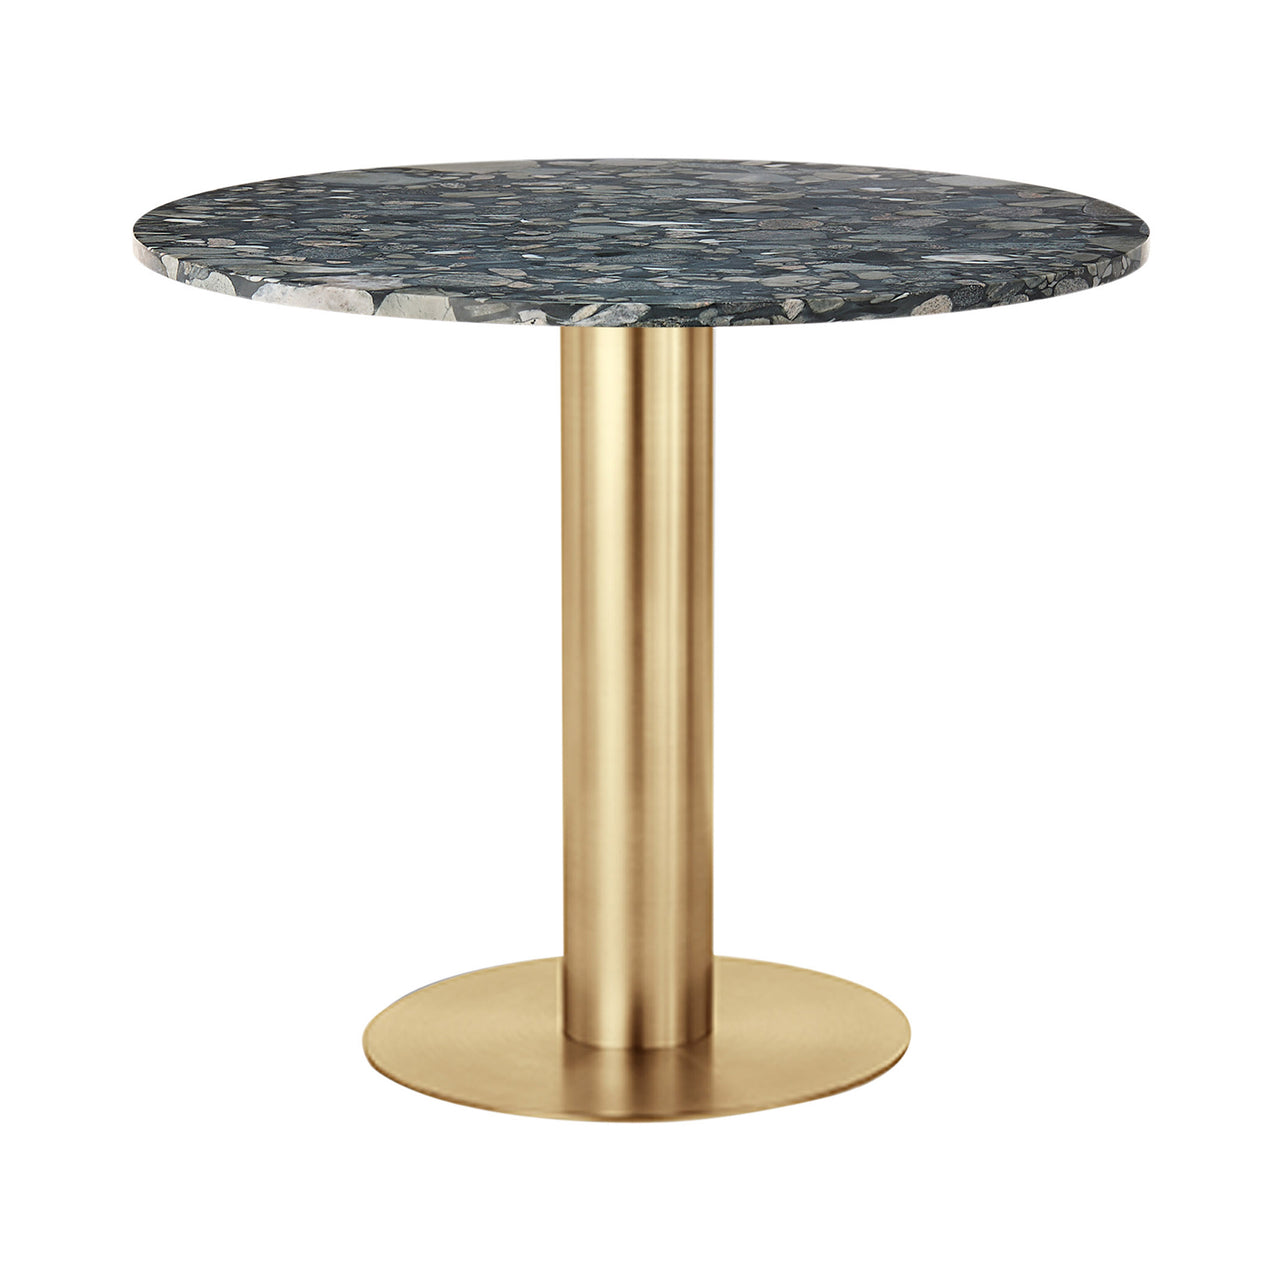 Tube Dining Table: Pebble Marble + Large - 35.4